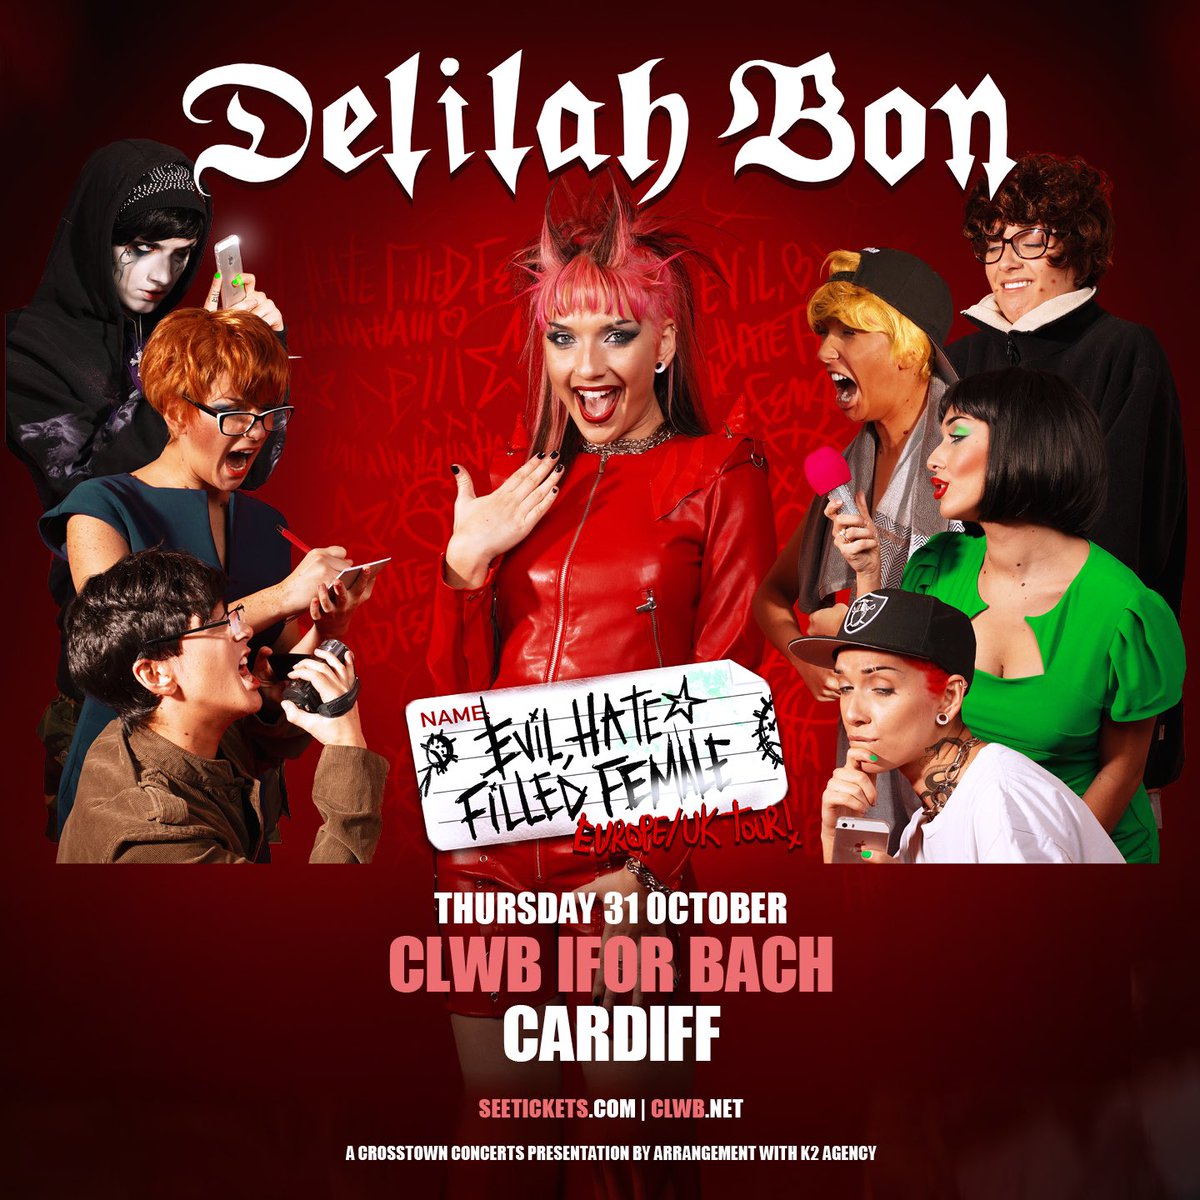 Tickets are on sale now for @DelilahBon_ at @ClwbIforBach. crosstownconcerts.seetickets.com/event/delilah-…